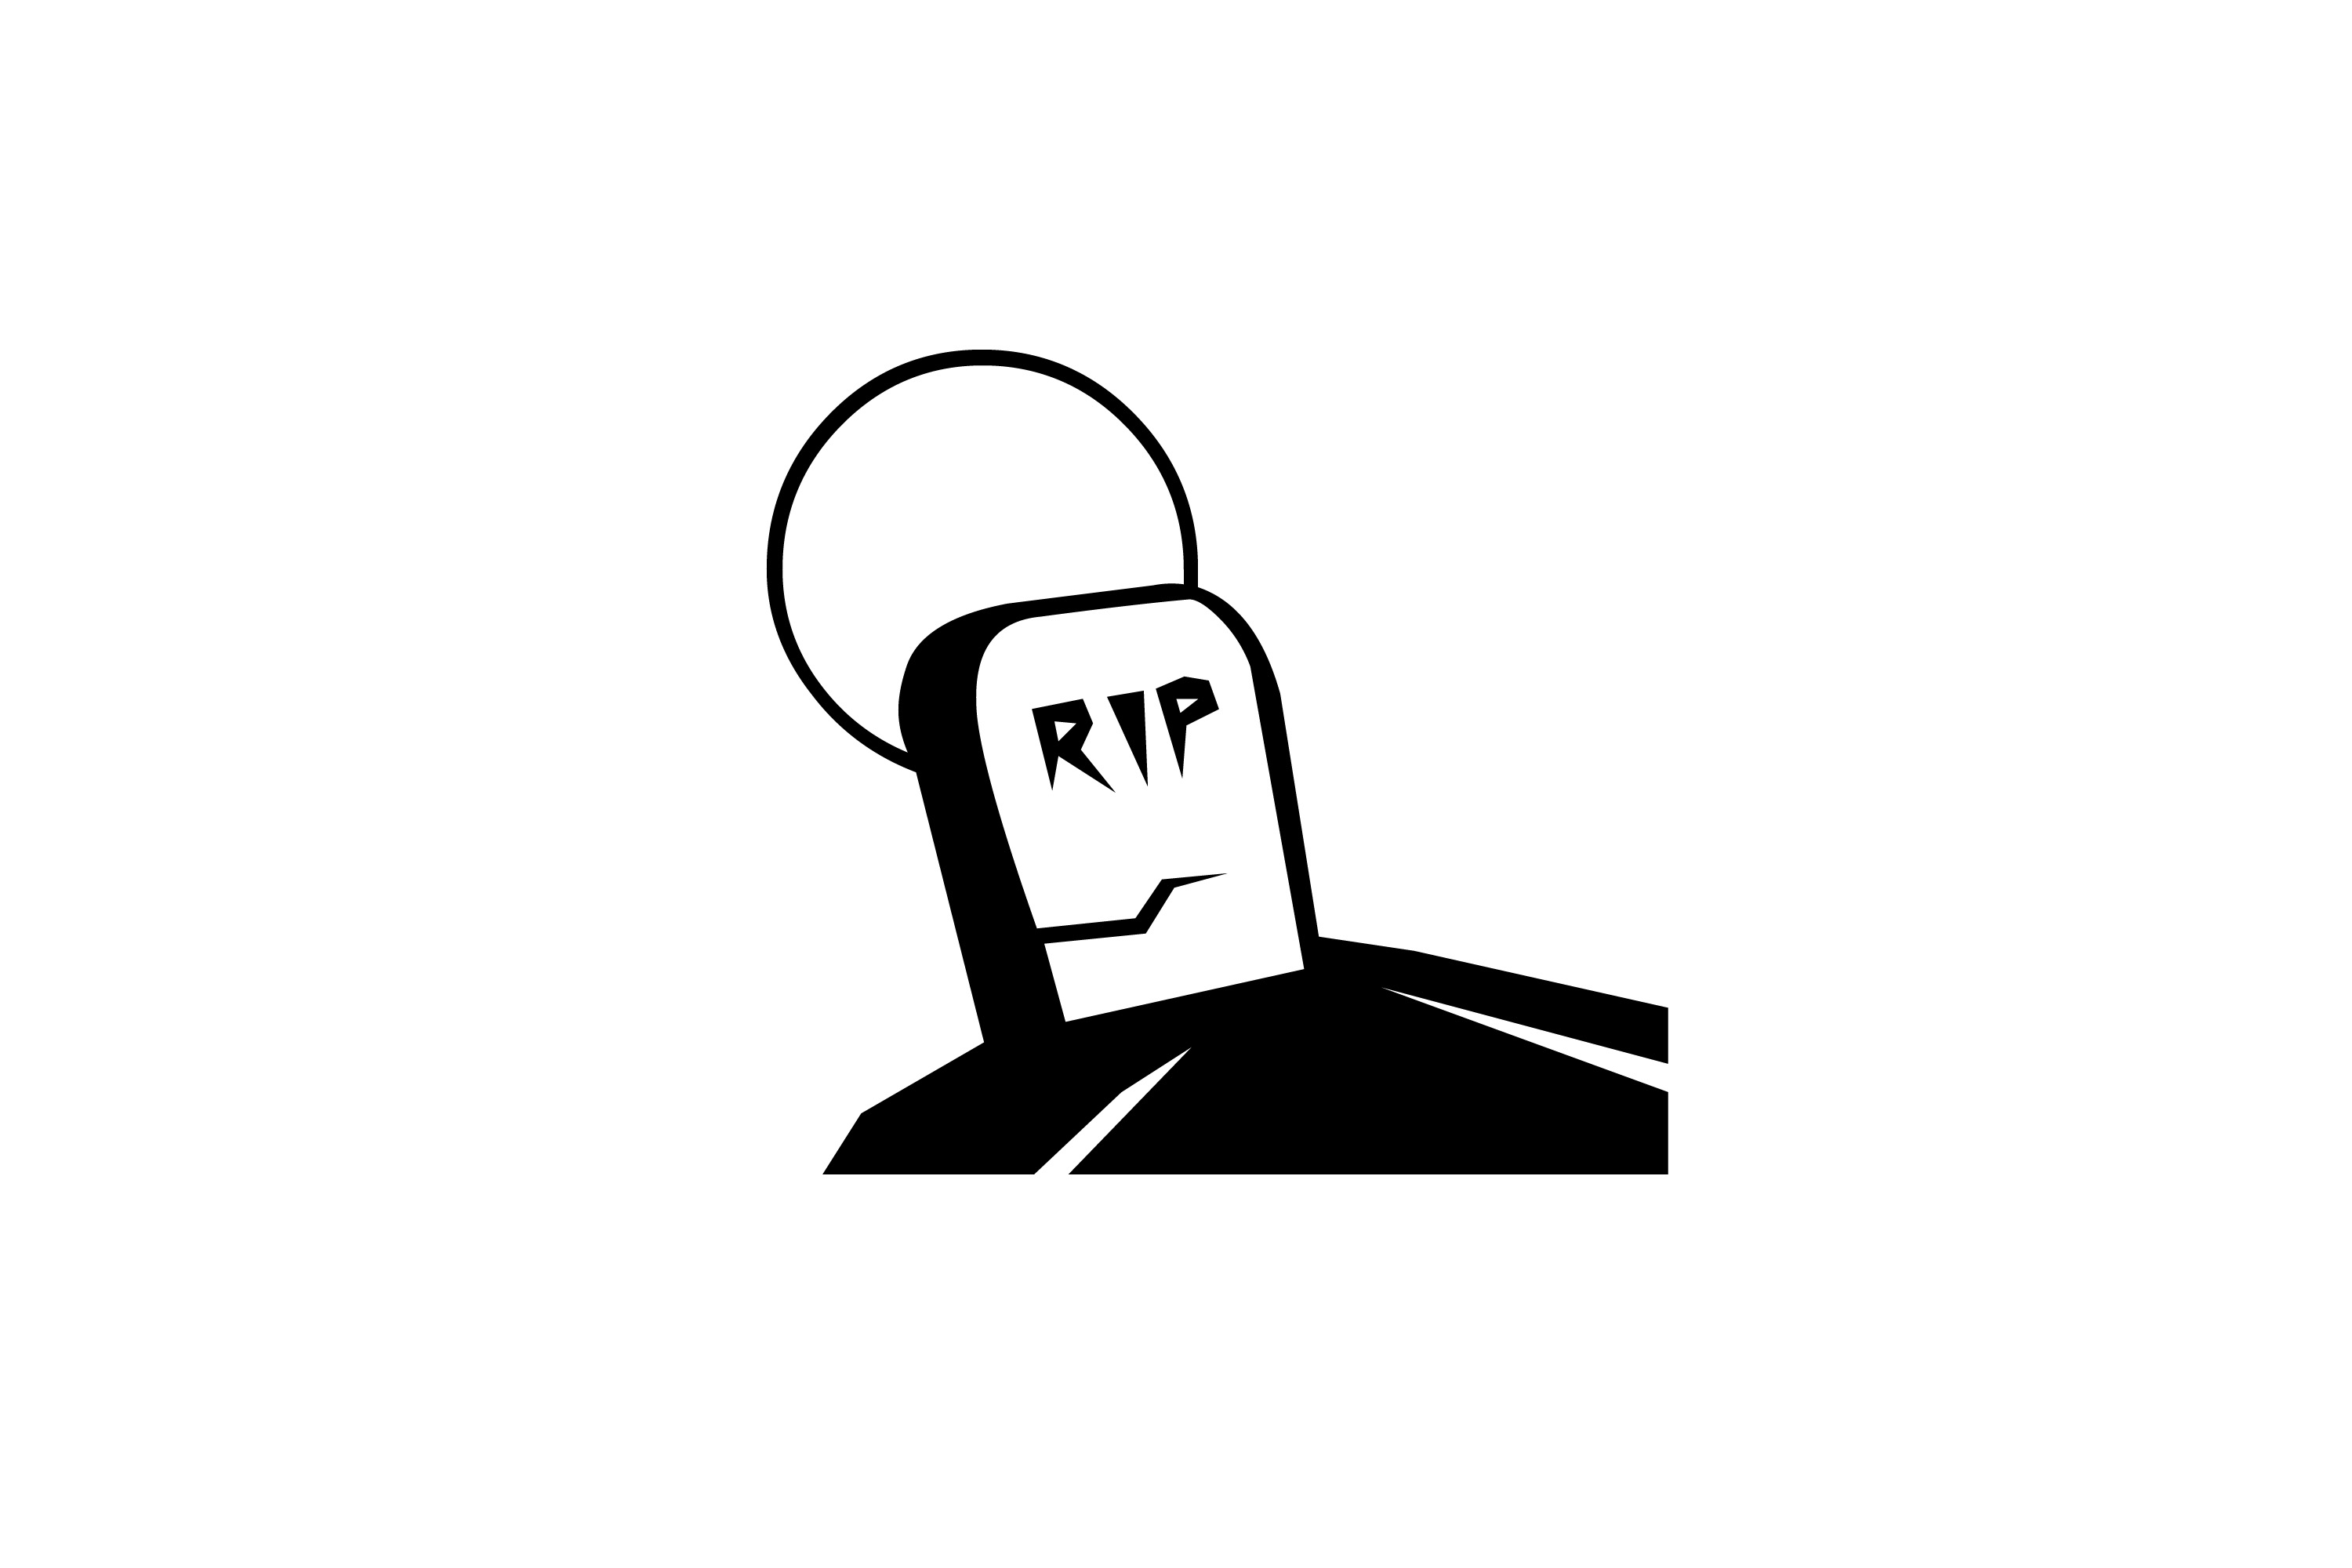 Rip Tombstone - ClipArt Best